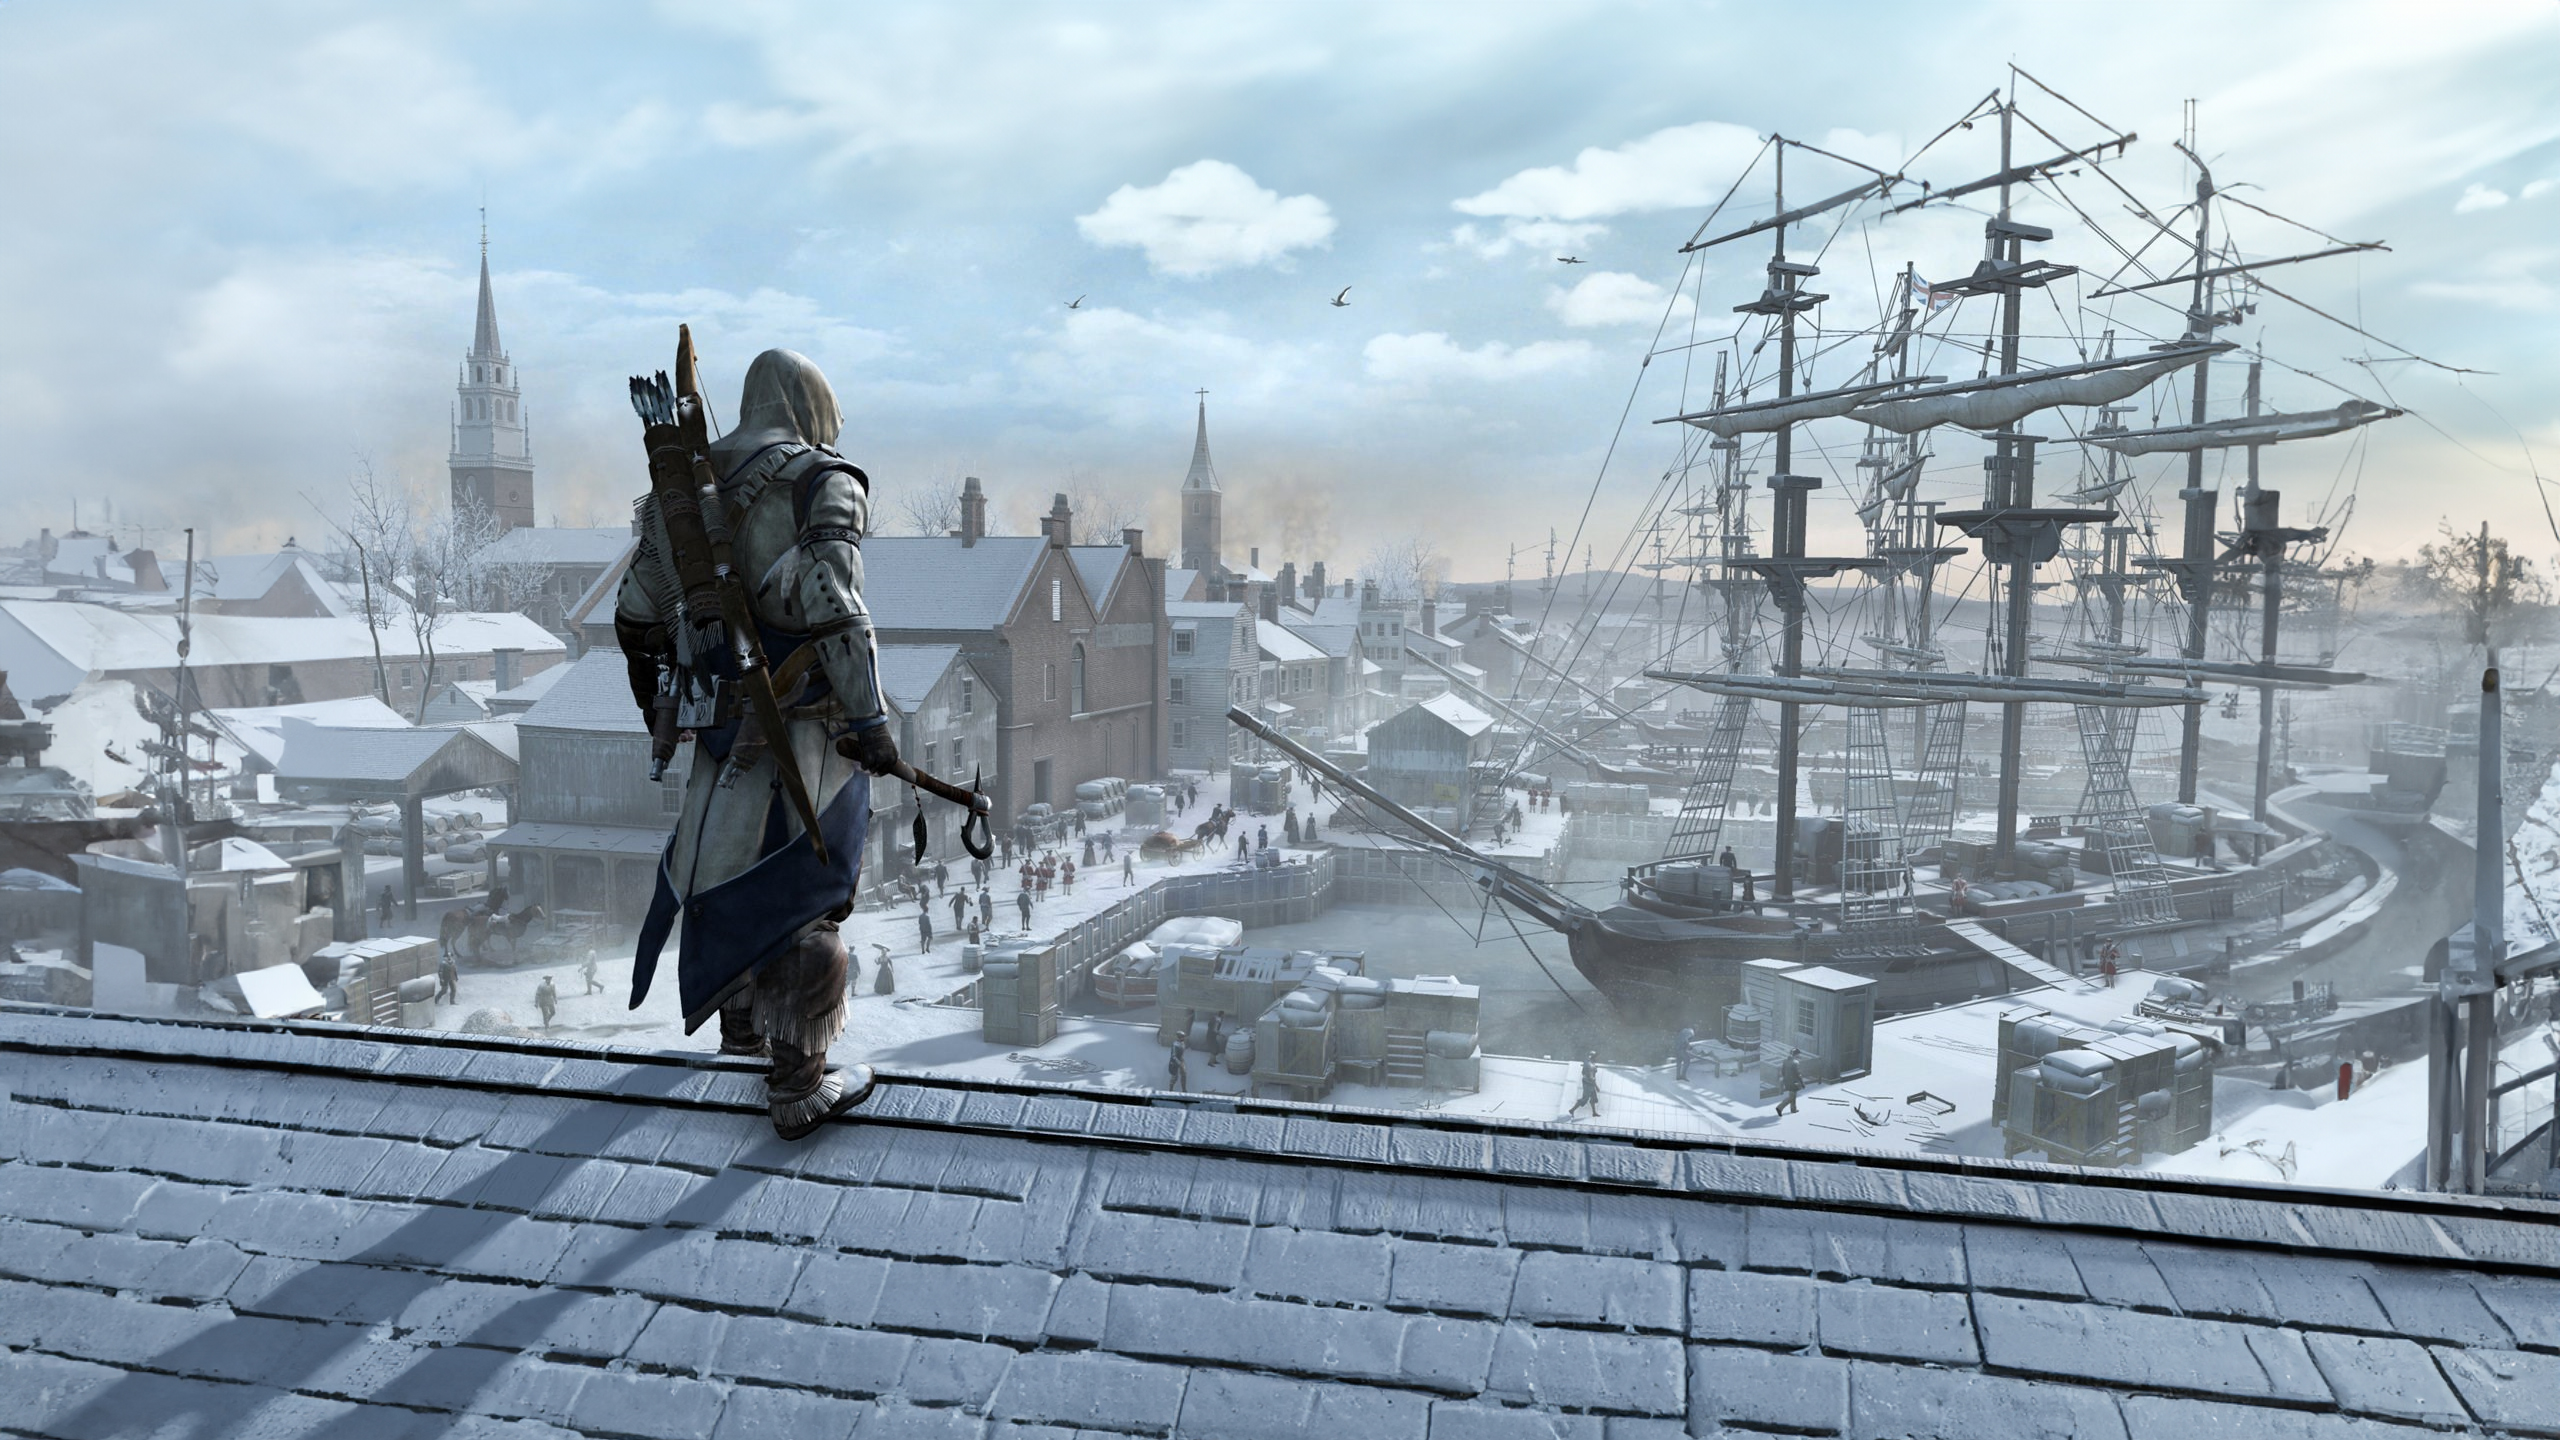 Photoshop Generative Fill Assassins Creed Winter Video Games Assassins Creed Iii Connor Kenway Axes  2560x1440